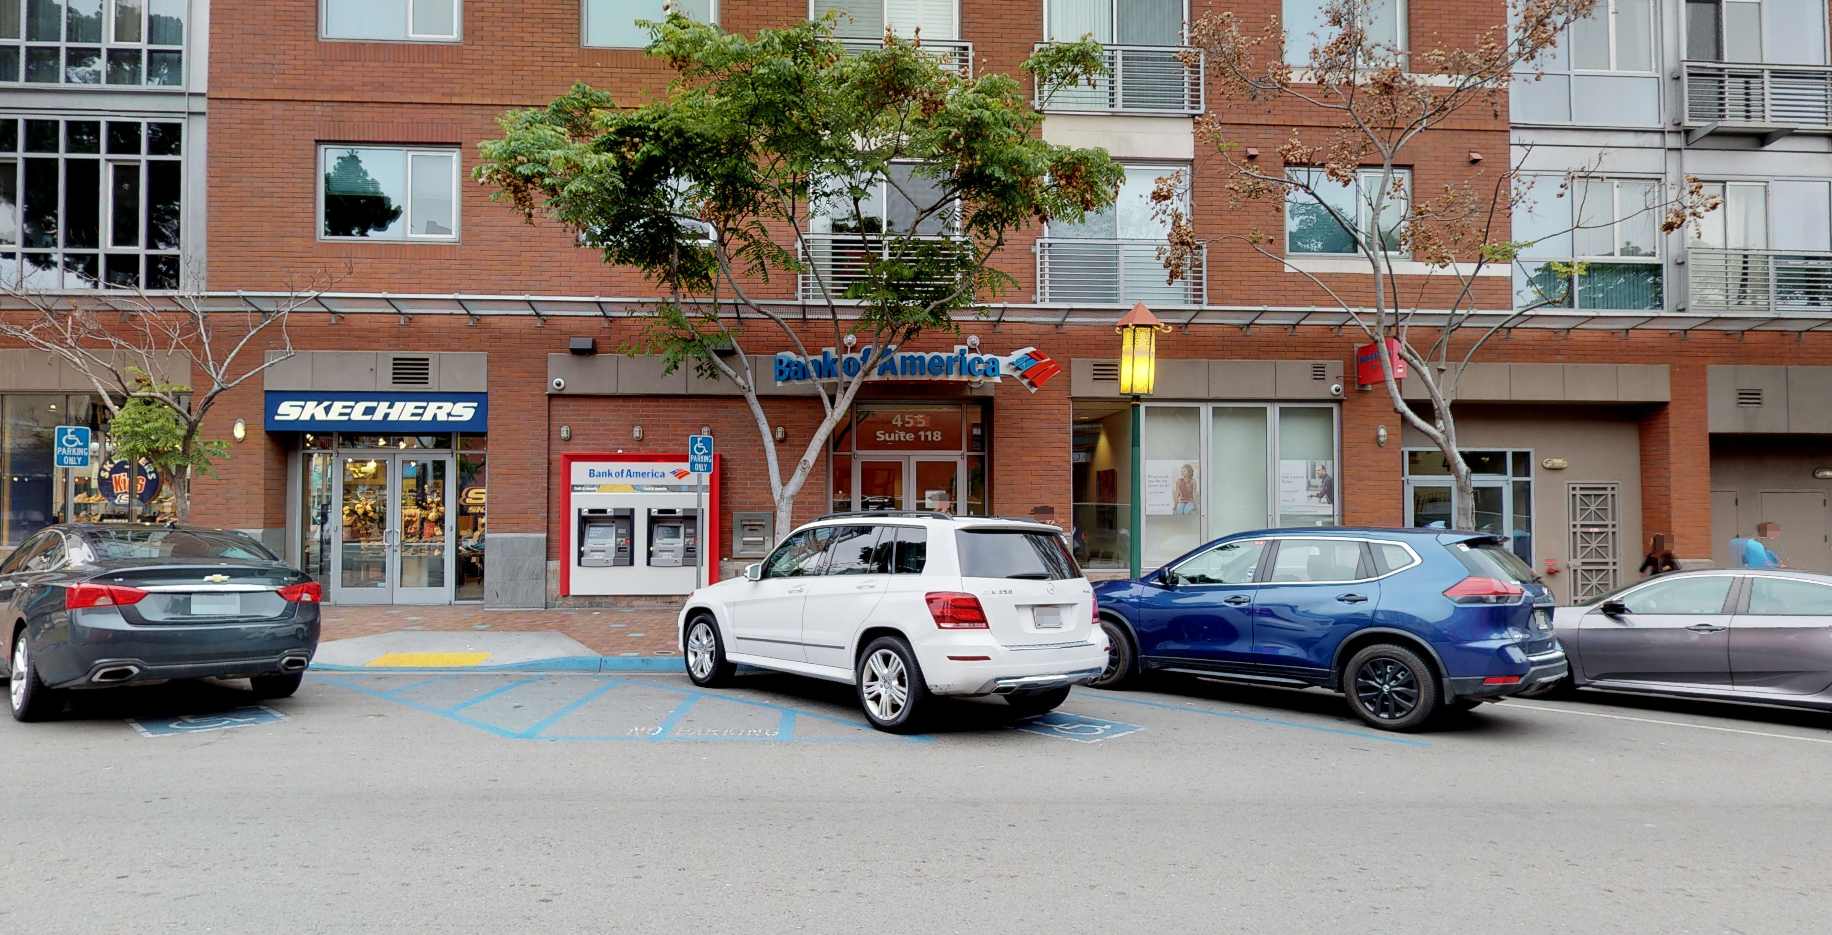 Bank of America financial center with walk-up ATM | 455 Island Ave, San Diego, CA 92101